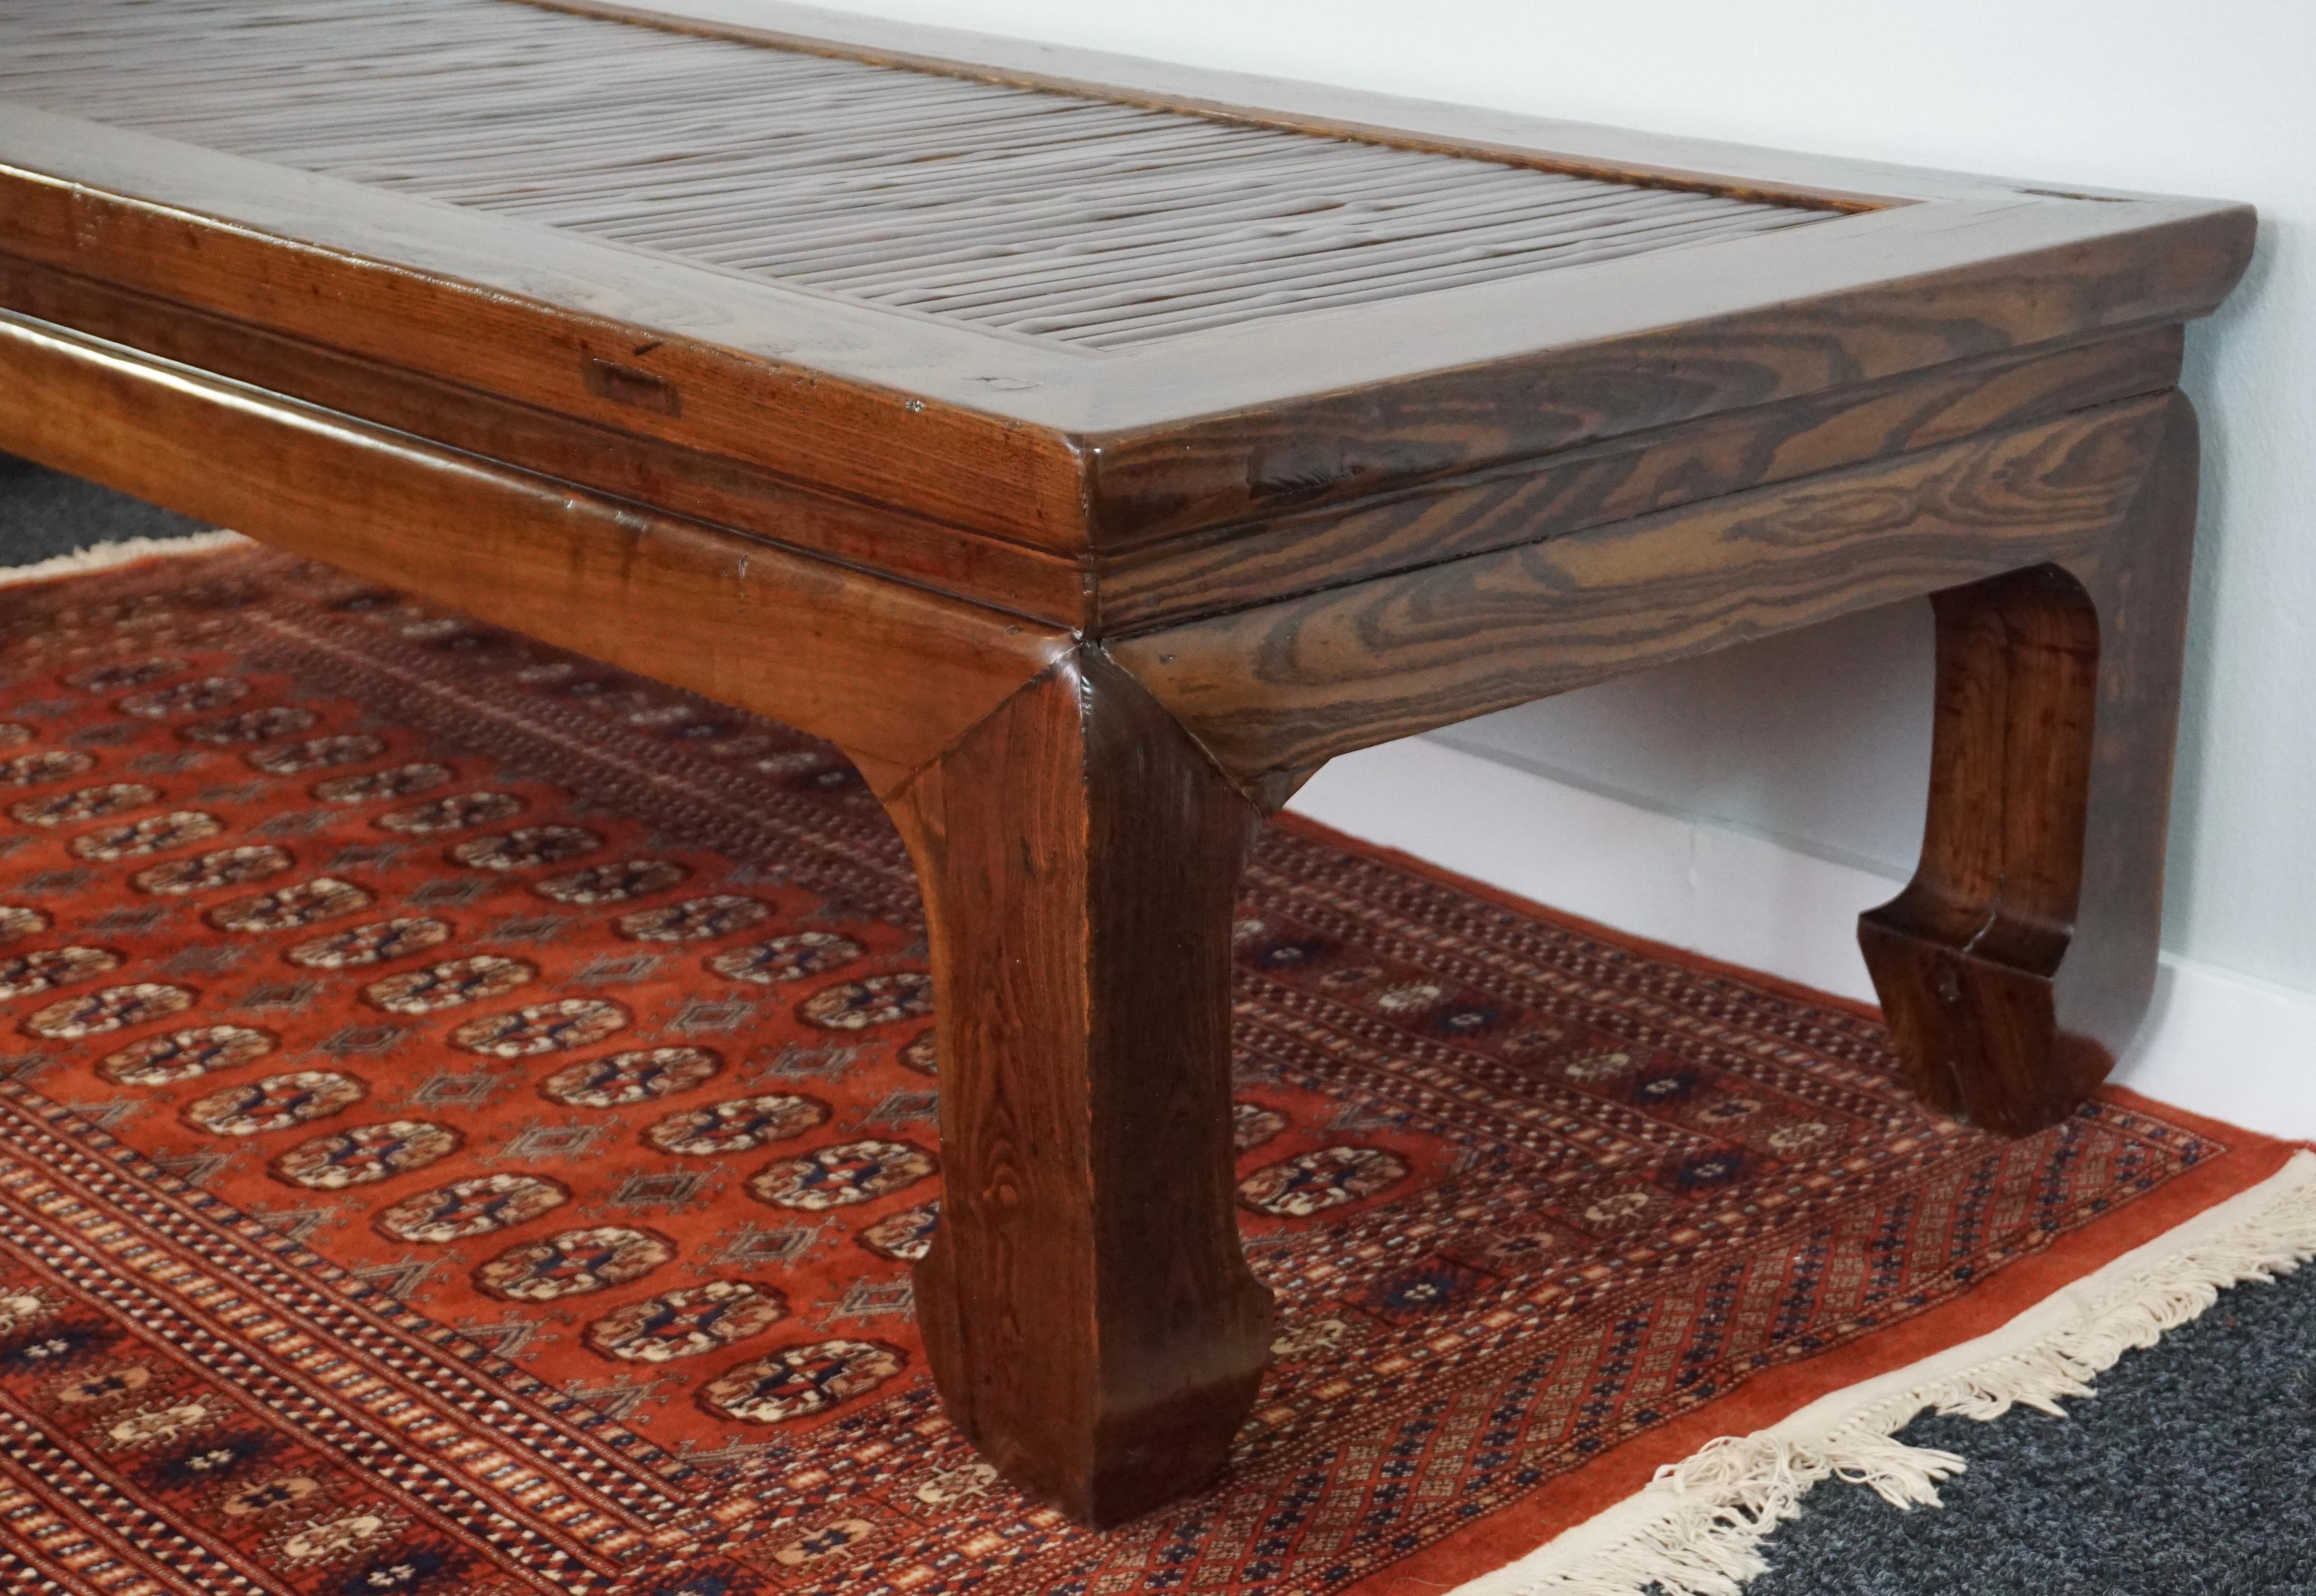 Late 19th Century Chinese Ching Dynasty Elm Wood Opium Bed Coffee Table